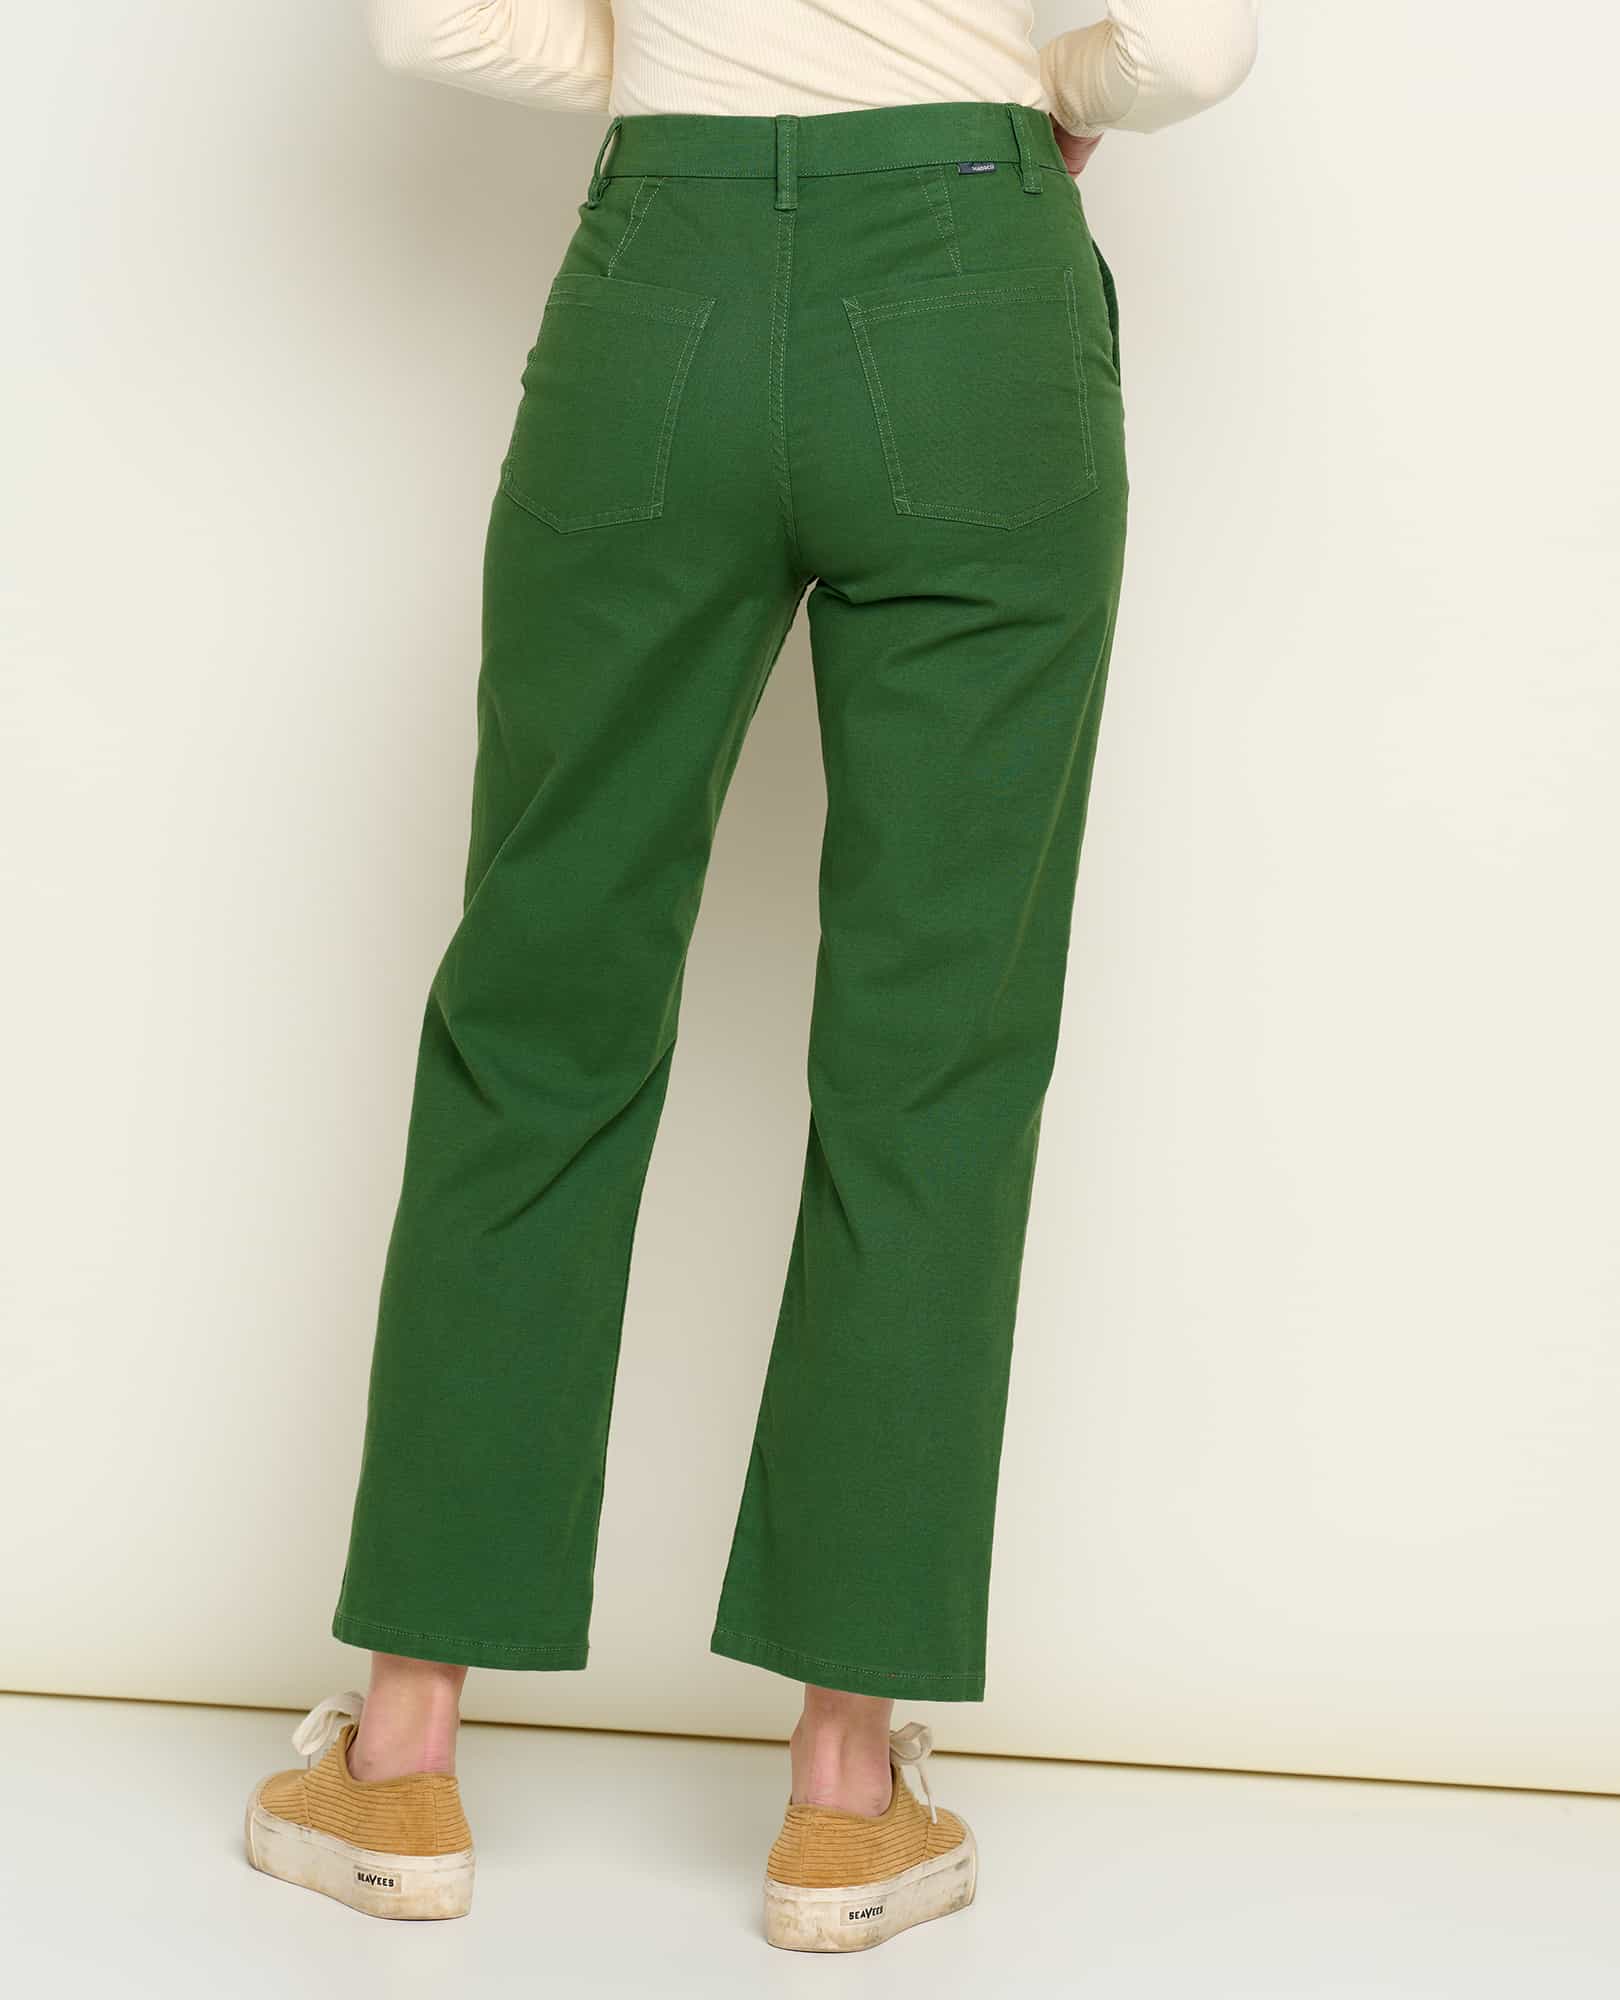 Earthworks High Rise Pant | Straight Leg Chino by Toad&Co